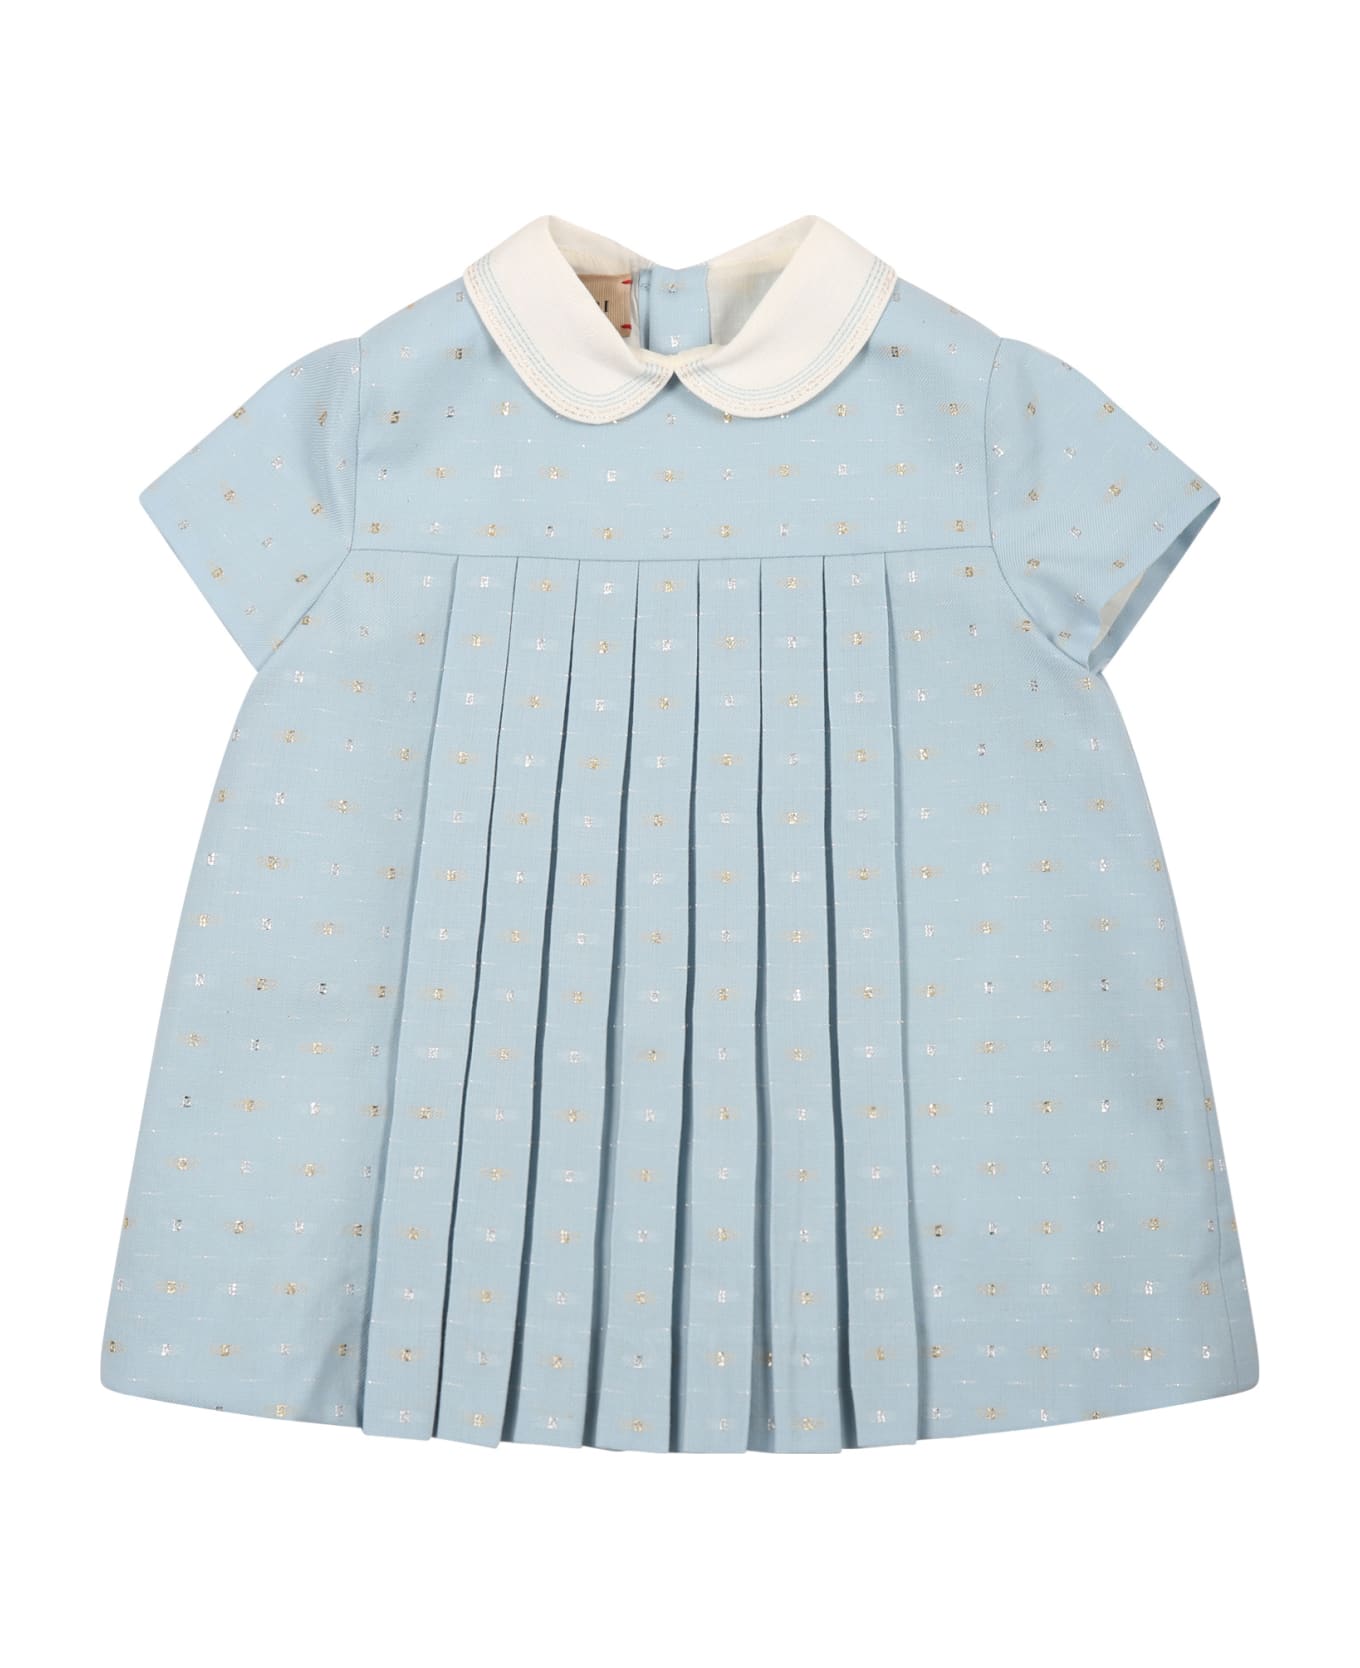 Gucci Light Blue Dress For Baby Girl With Gg - Light Blue ウェア